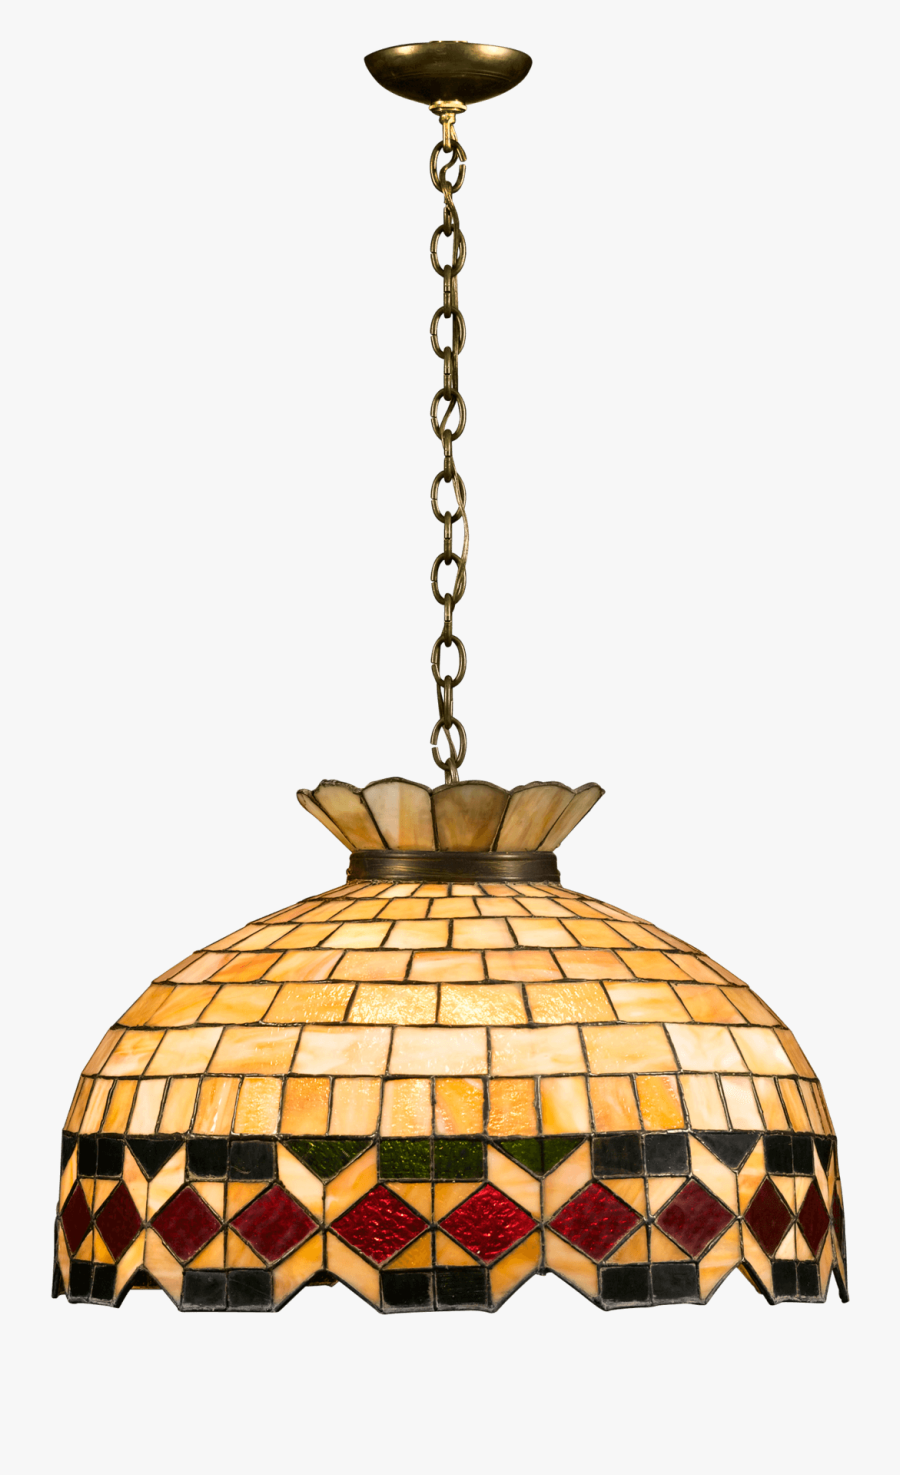 Ceiling Lamp Png - Stained Glass Hanging Light, Transparent Clipart